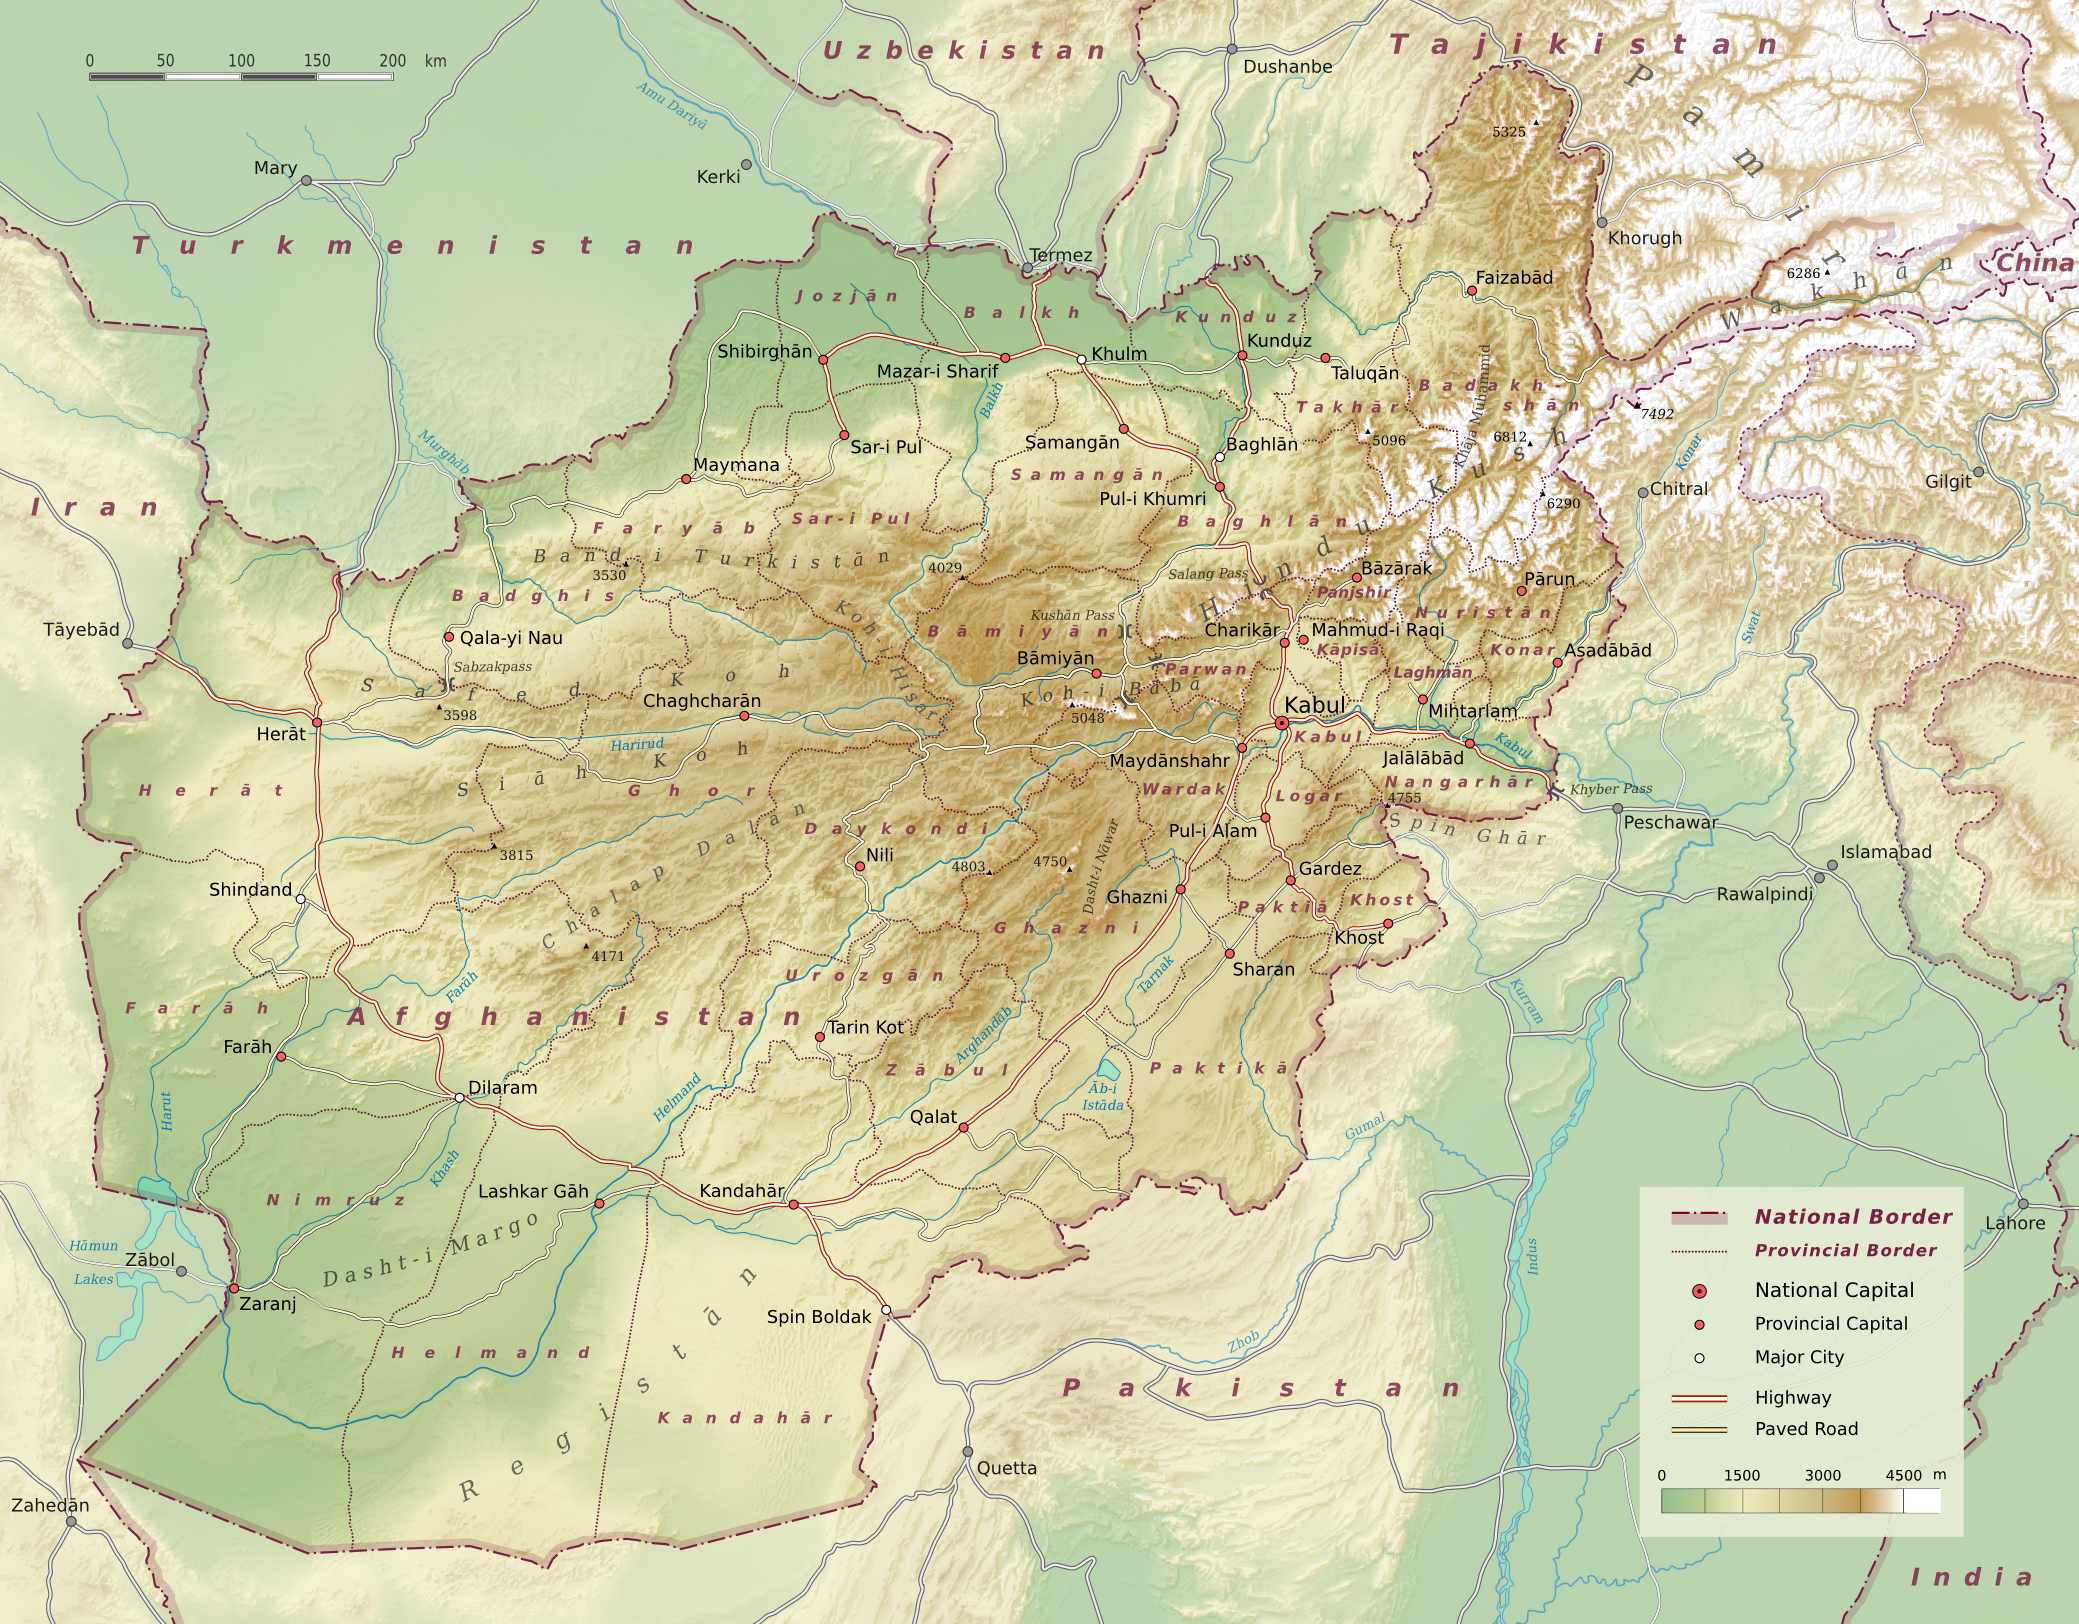 Aghanistan Relief Map